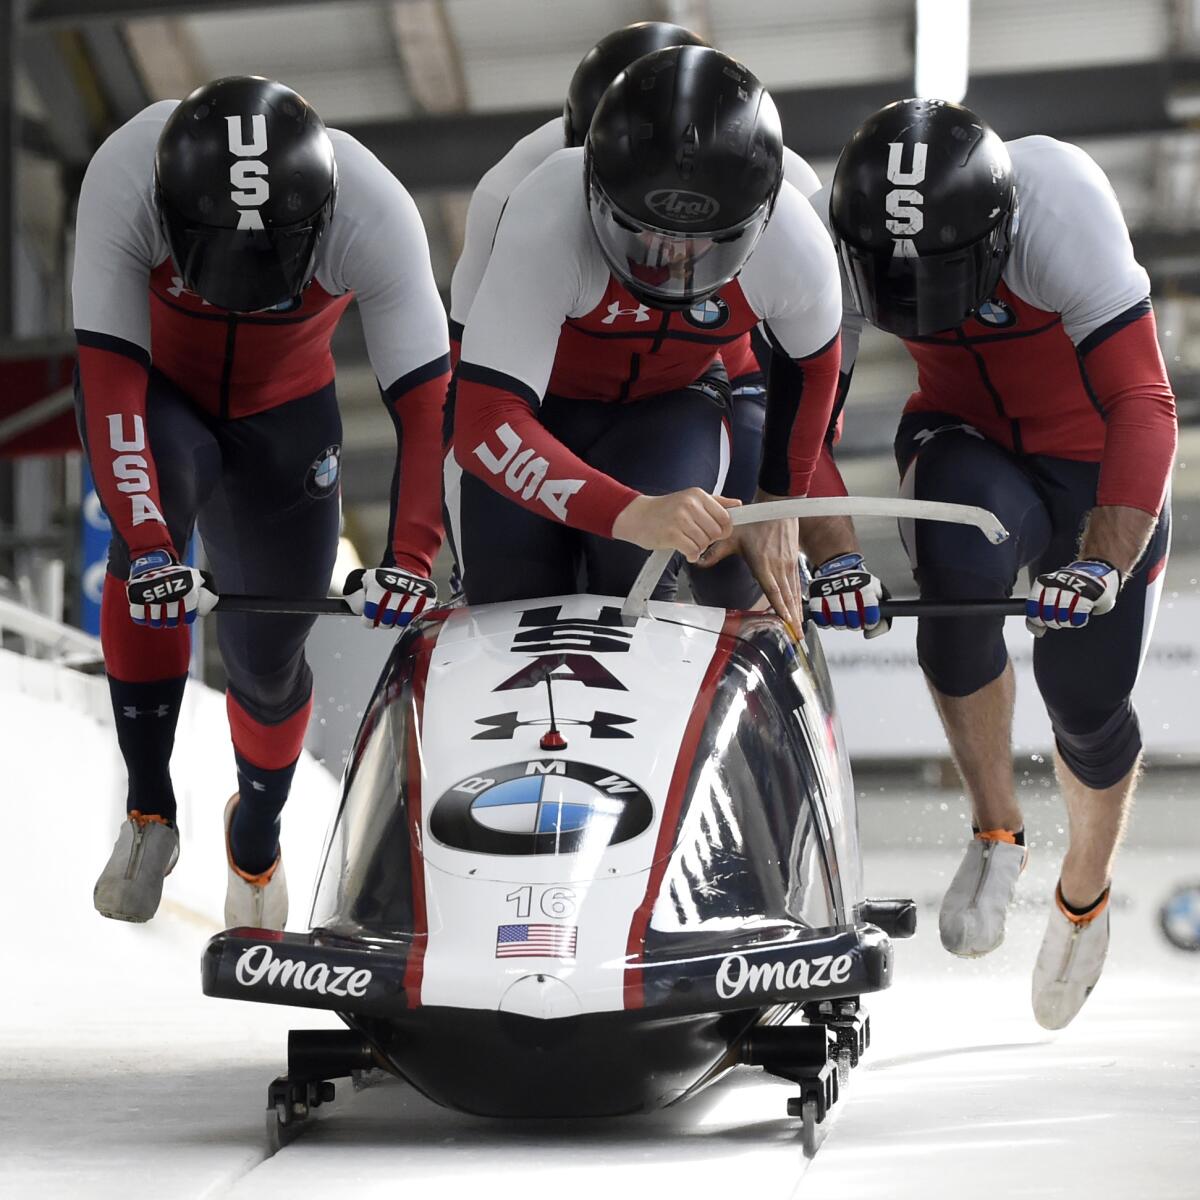 Hunter Church, Josh Williamson, James Reed and Kris Horn push the sled at the start of a heat.